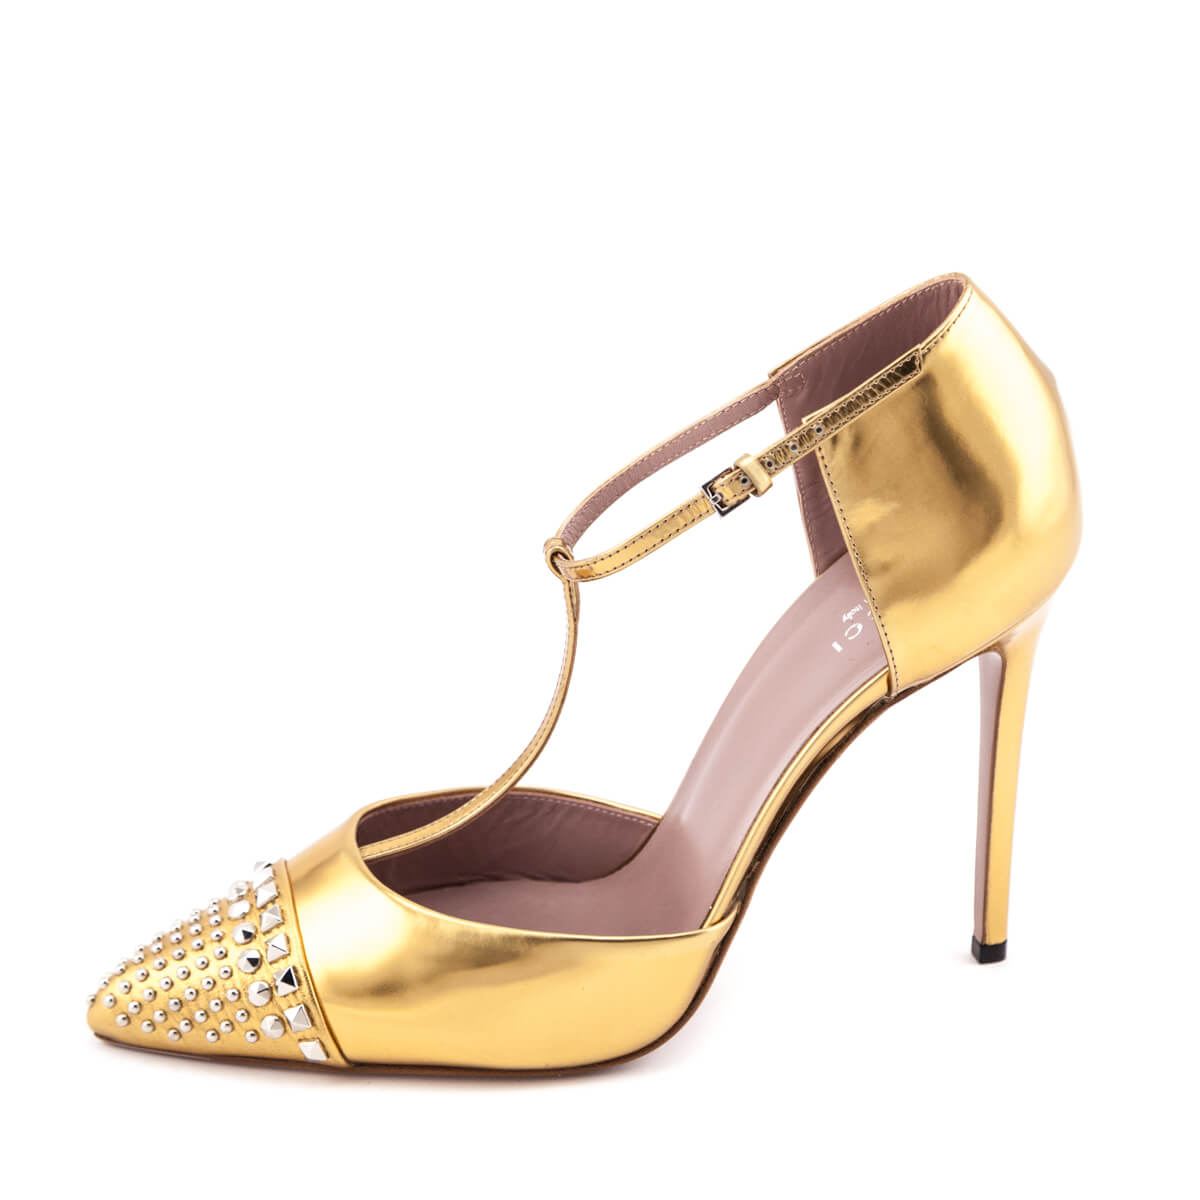 Gucci Gold Studded T-Bar Pumps Size US 11.5 | EU 41.5 - Love that Bag etc - Preowned Authentic Designer Handbags & Preloved Fashions